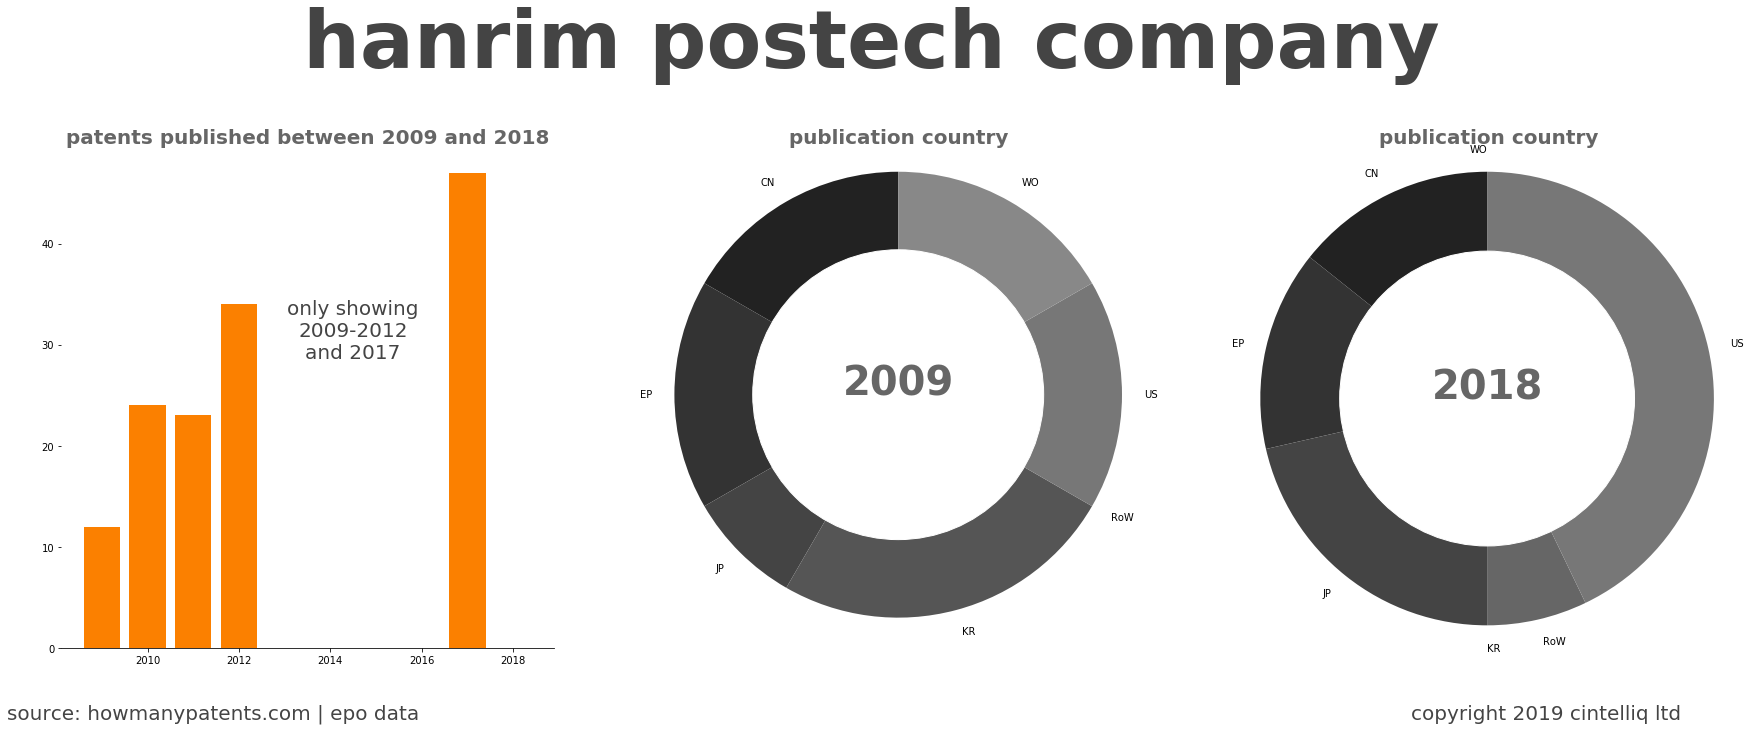 summary of patents for Hanrim Postech Company